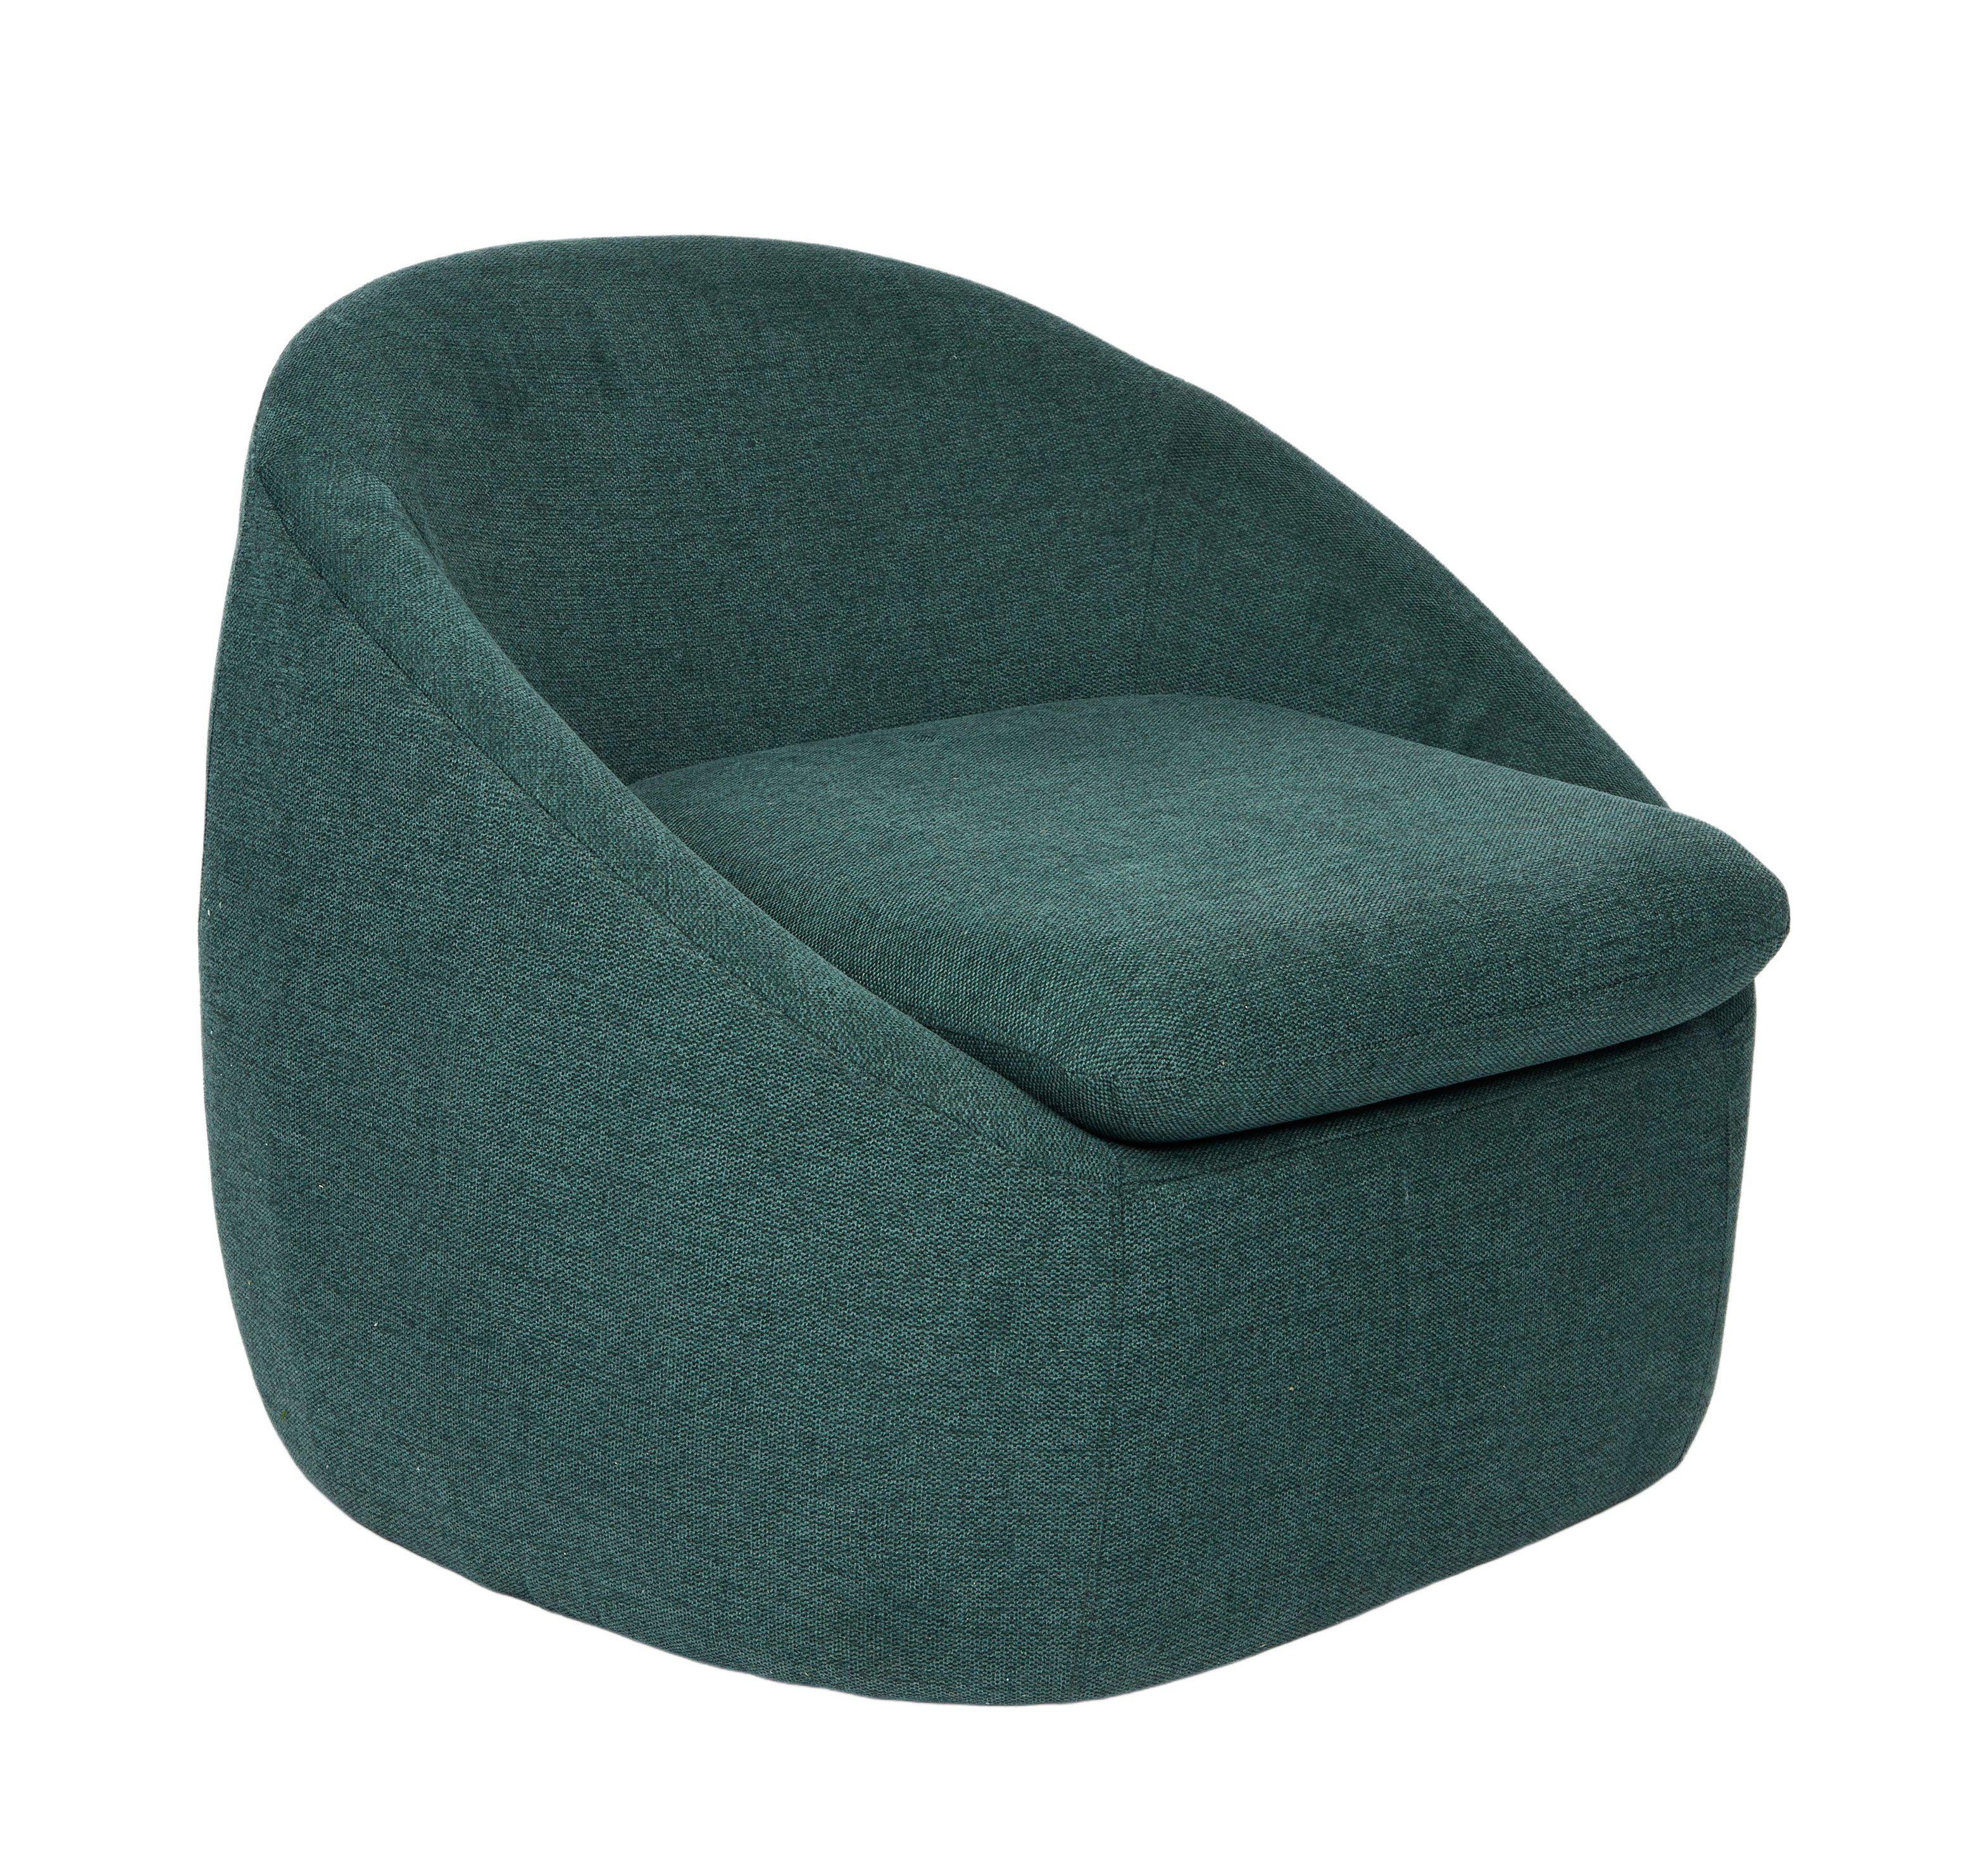 Tevin Arm Chair - Green-Furniture-Coast To Coast Home-The Bay Room